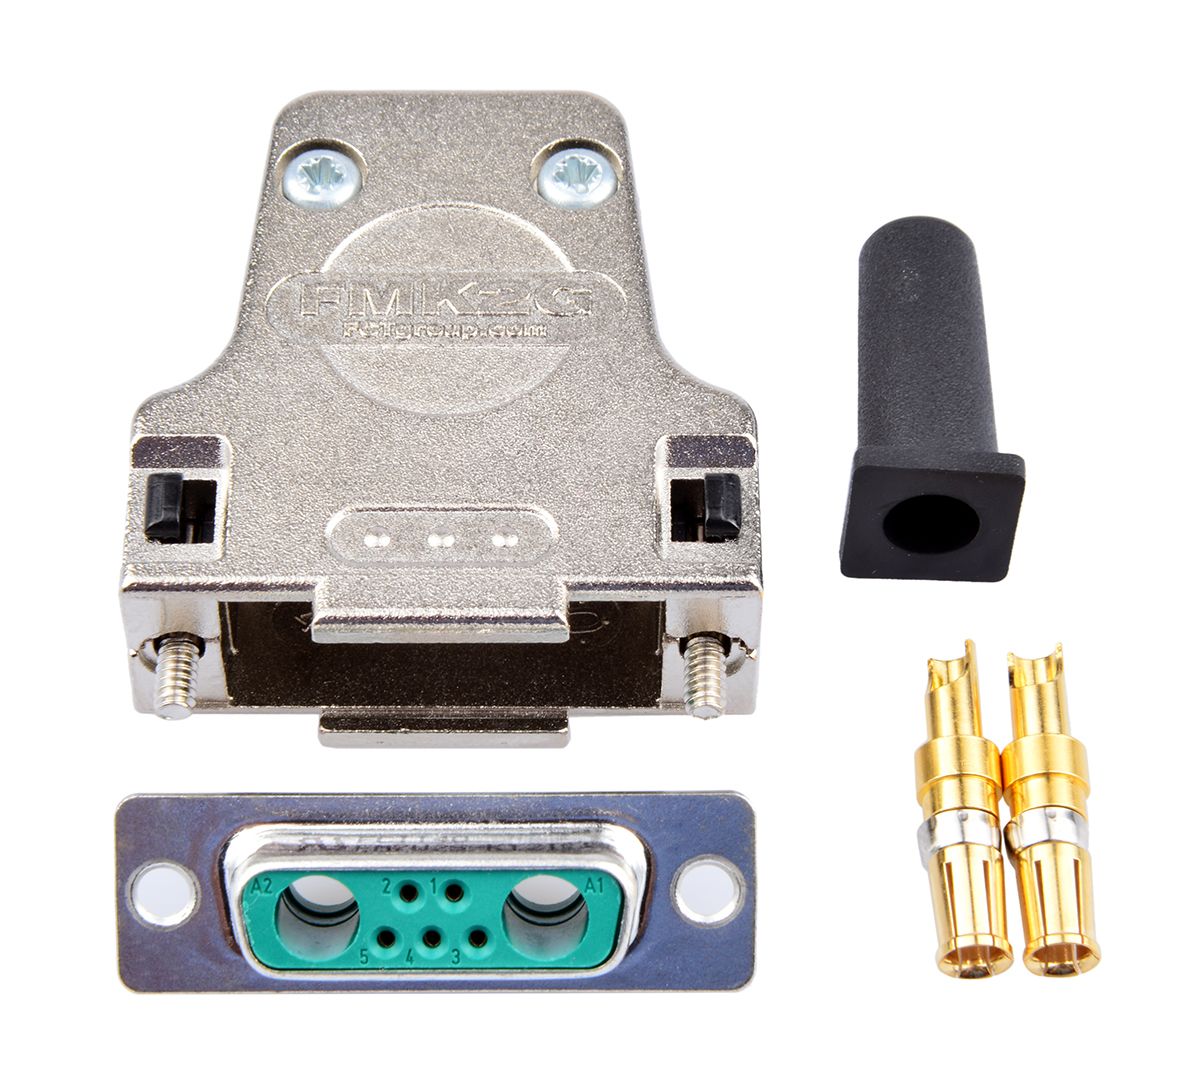 FCT from Molex FMK 7 Way Cable Mount D-sub Connector Socket